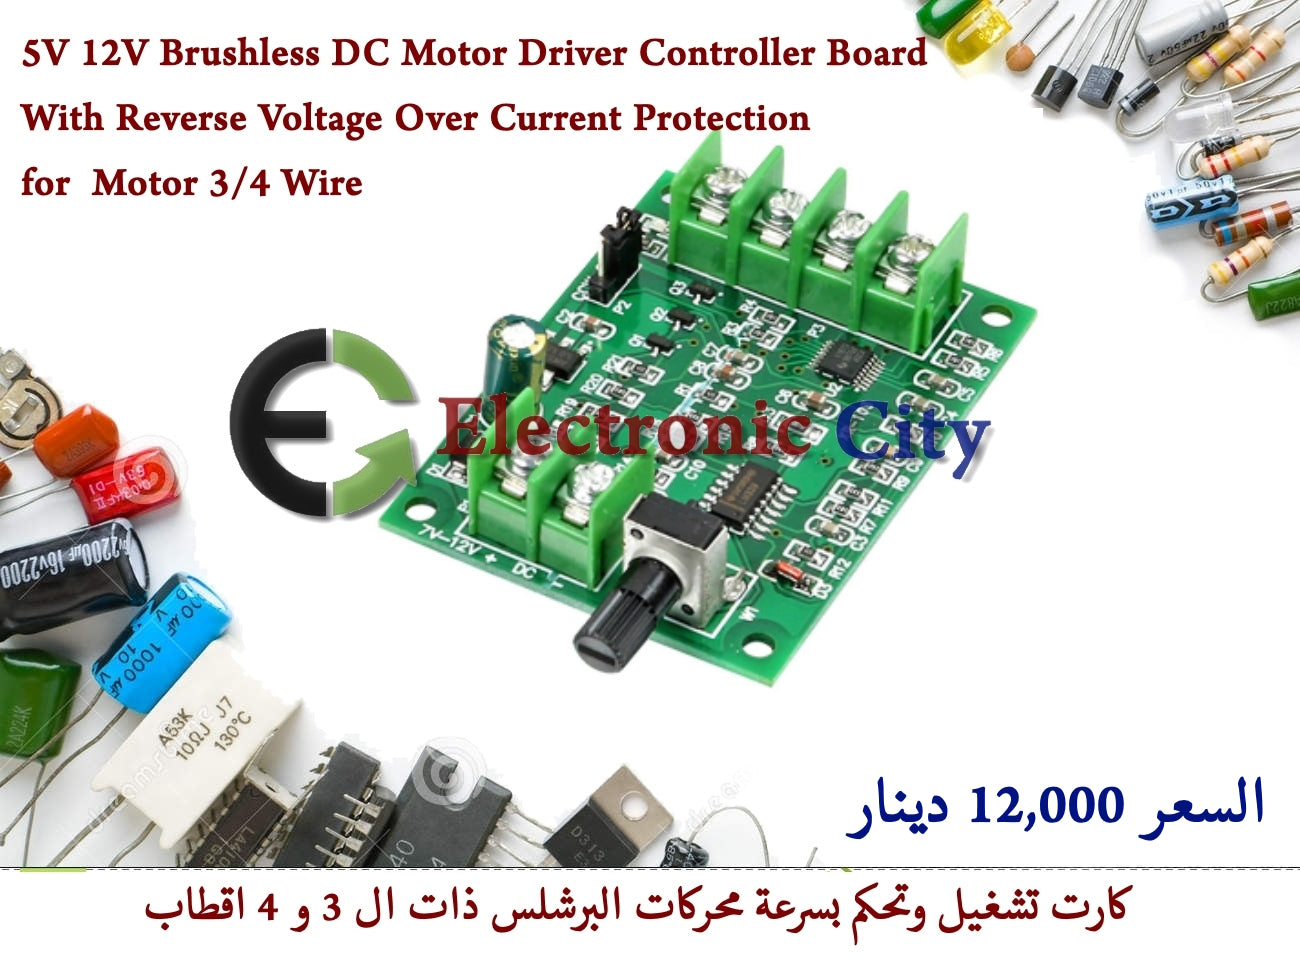 5V 12V Brushless DC Motor Driver Controller Board with Reverse Voltage Over Current Protection for Motor 3-4 Wire #R1 012141